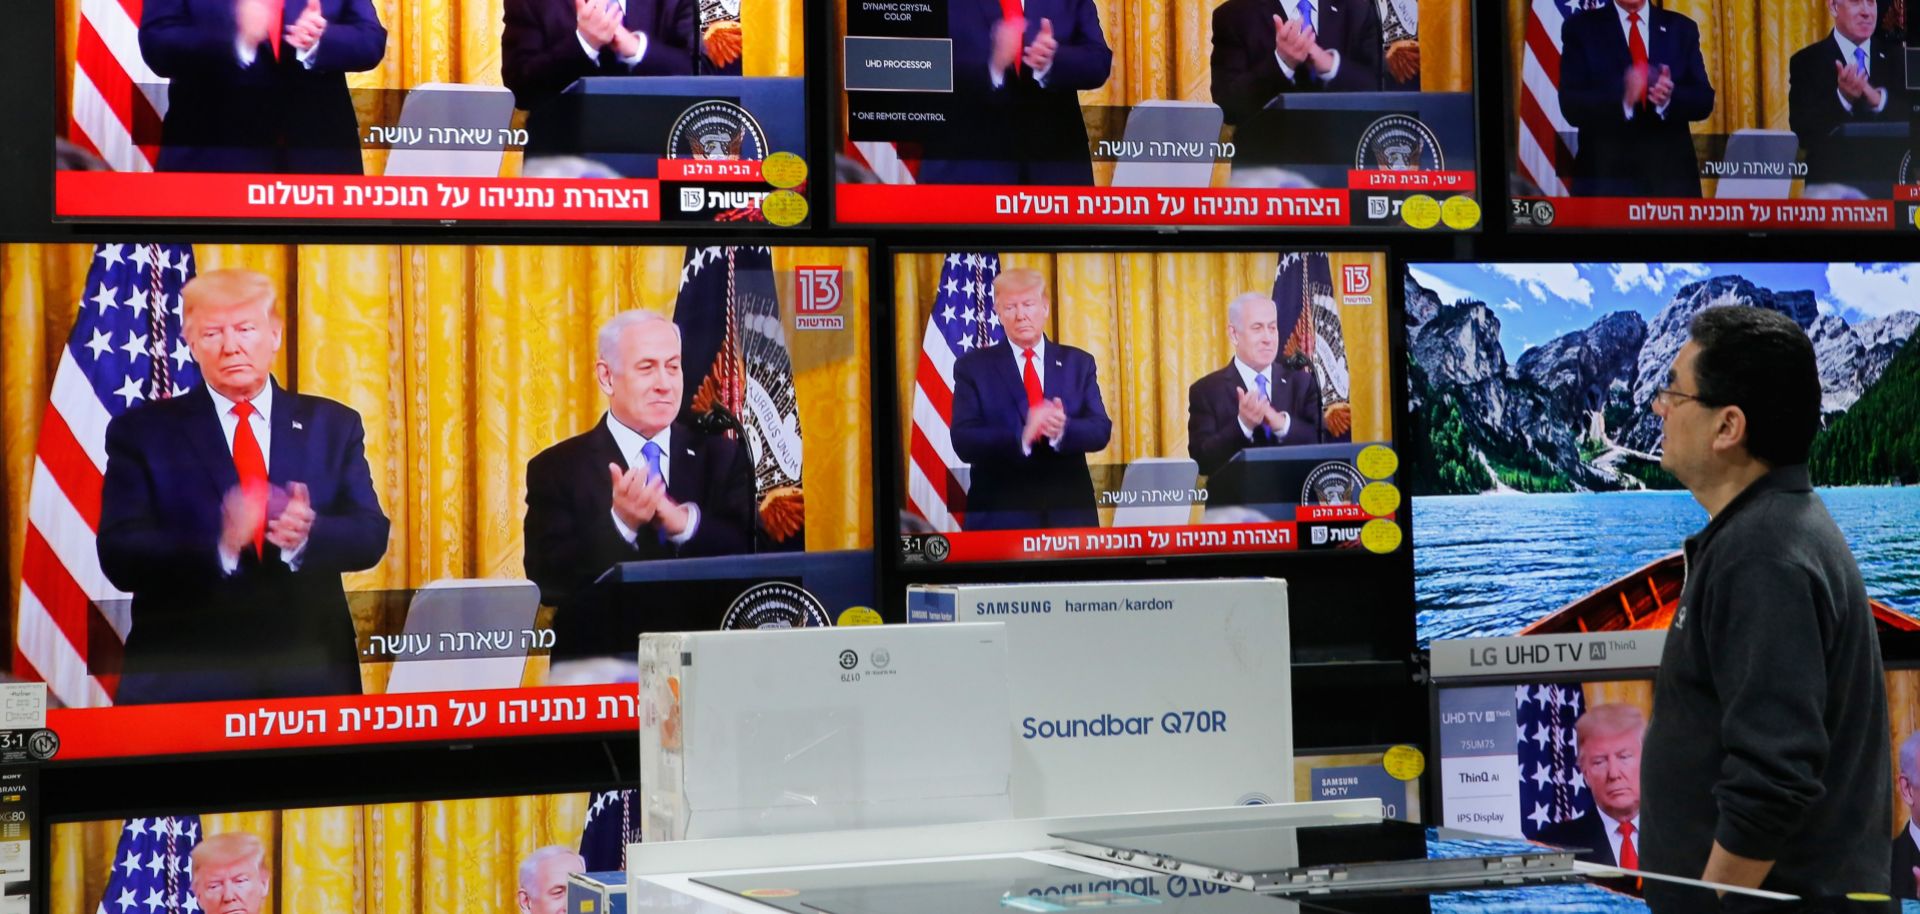 A man at an electronics store in Modiin, Israel, watches U.S. President Donald Trump and Israeli Prime Minister Benjamin Netanyahu unveil the Trump administration's Mideast peace plan during a White House news conference on Jan. 28, 2020.